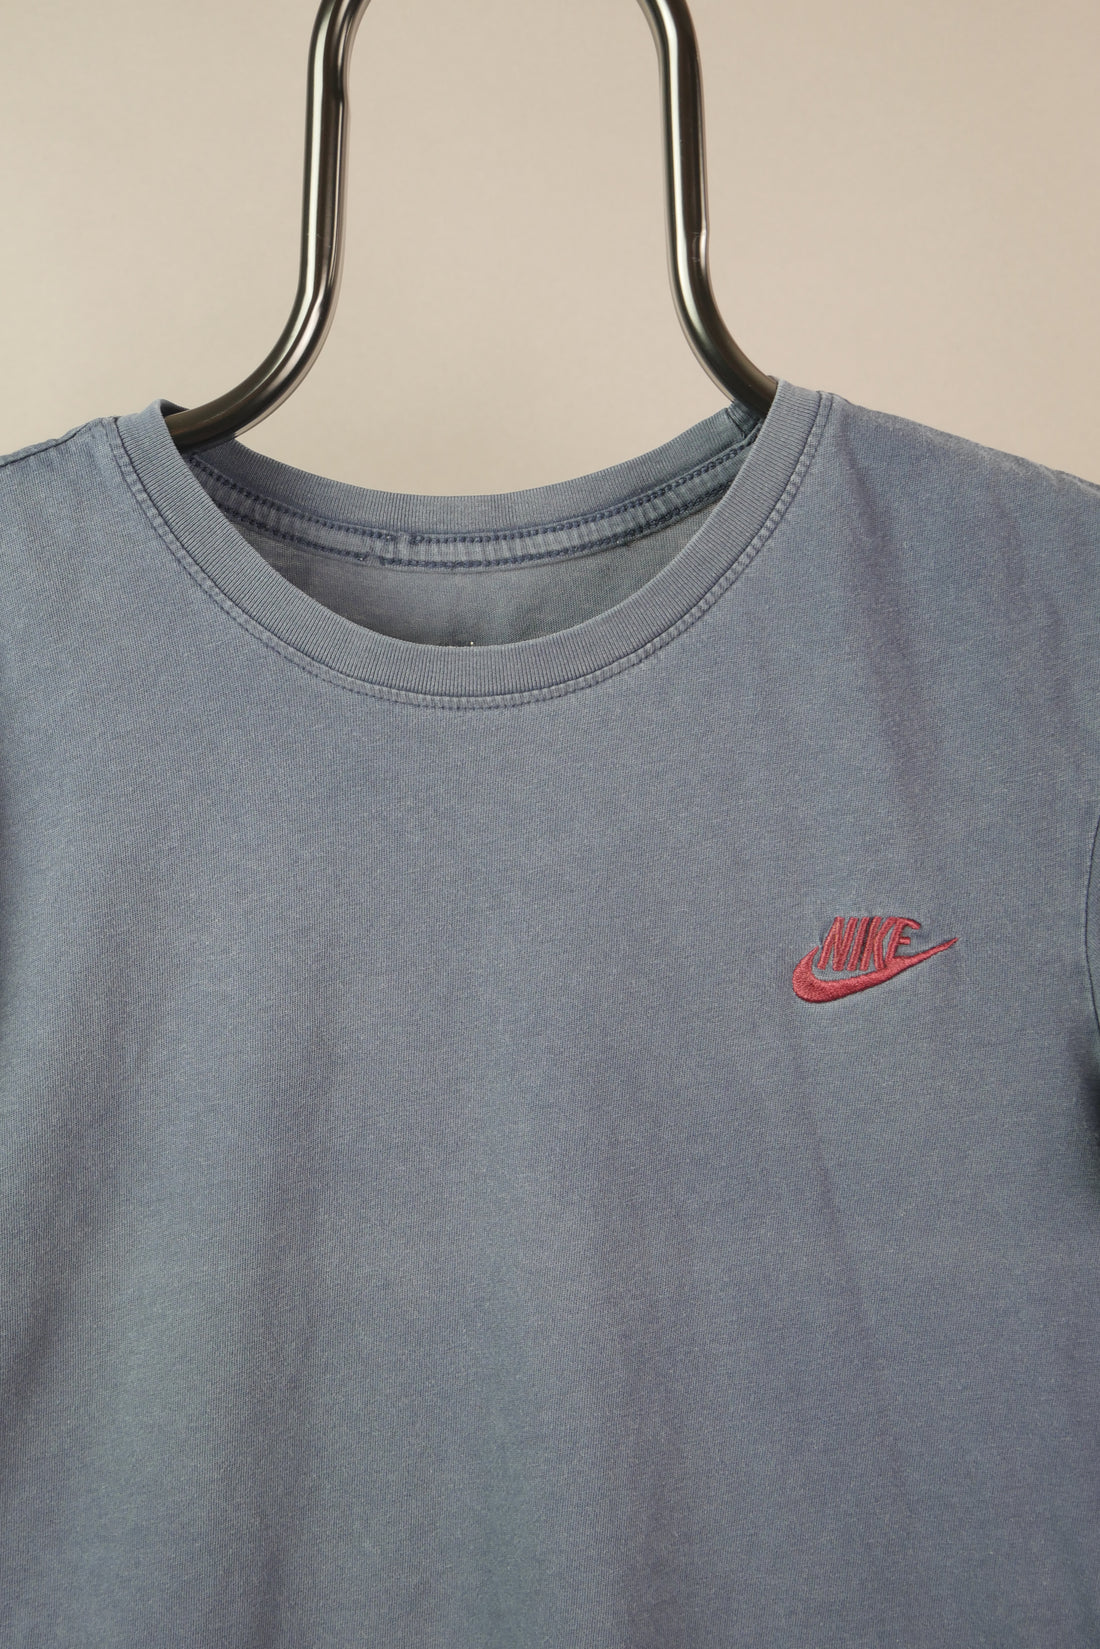 The Vintage Nike T-Shirt (S)